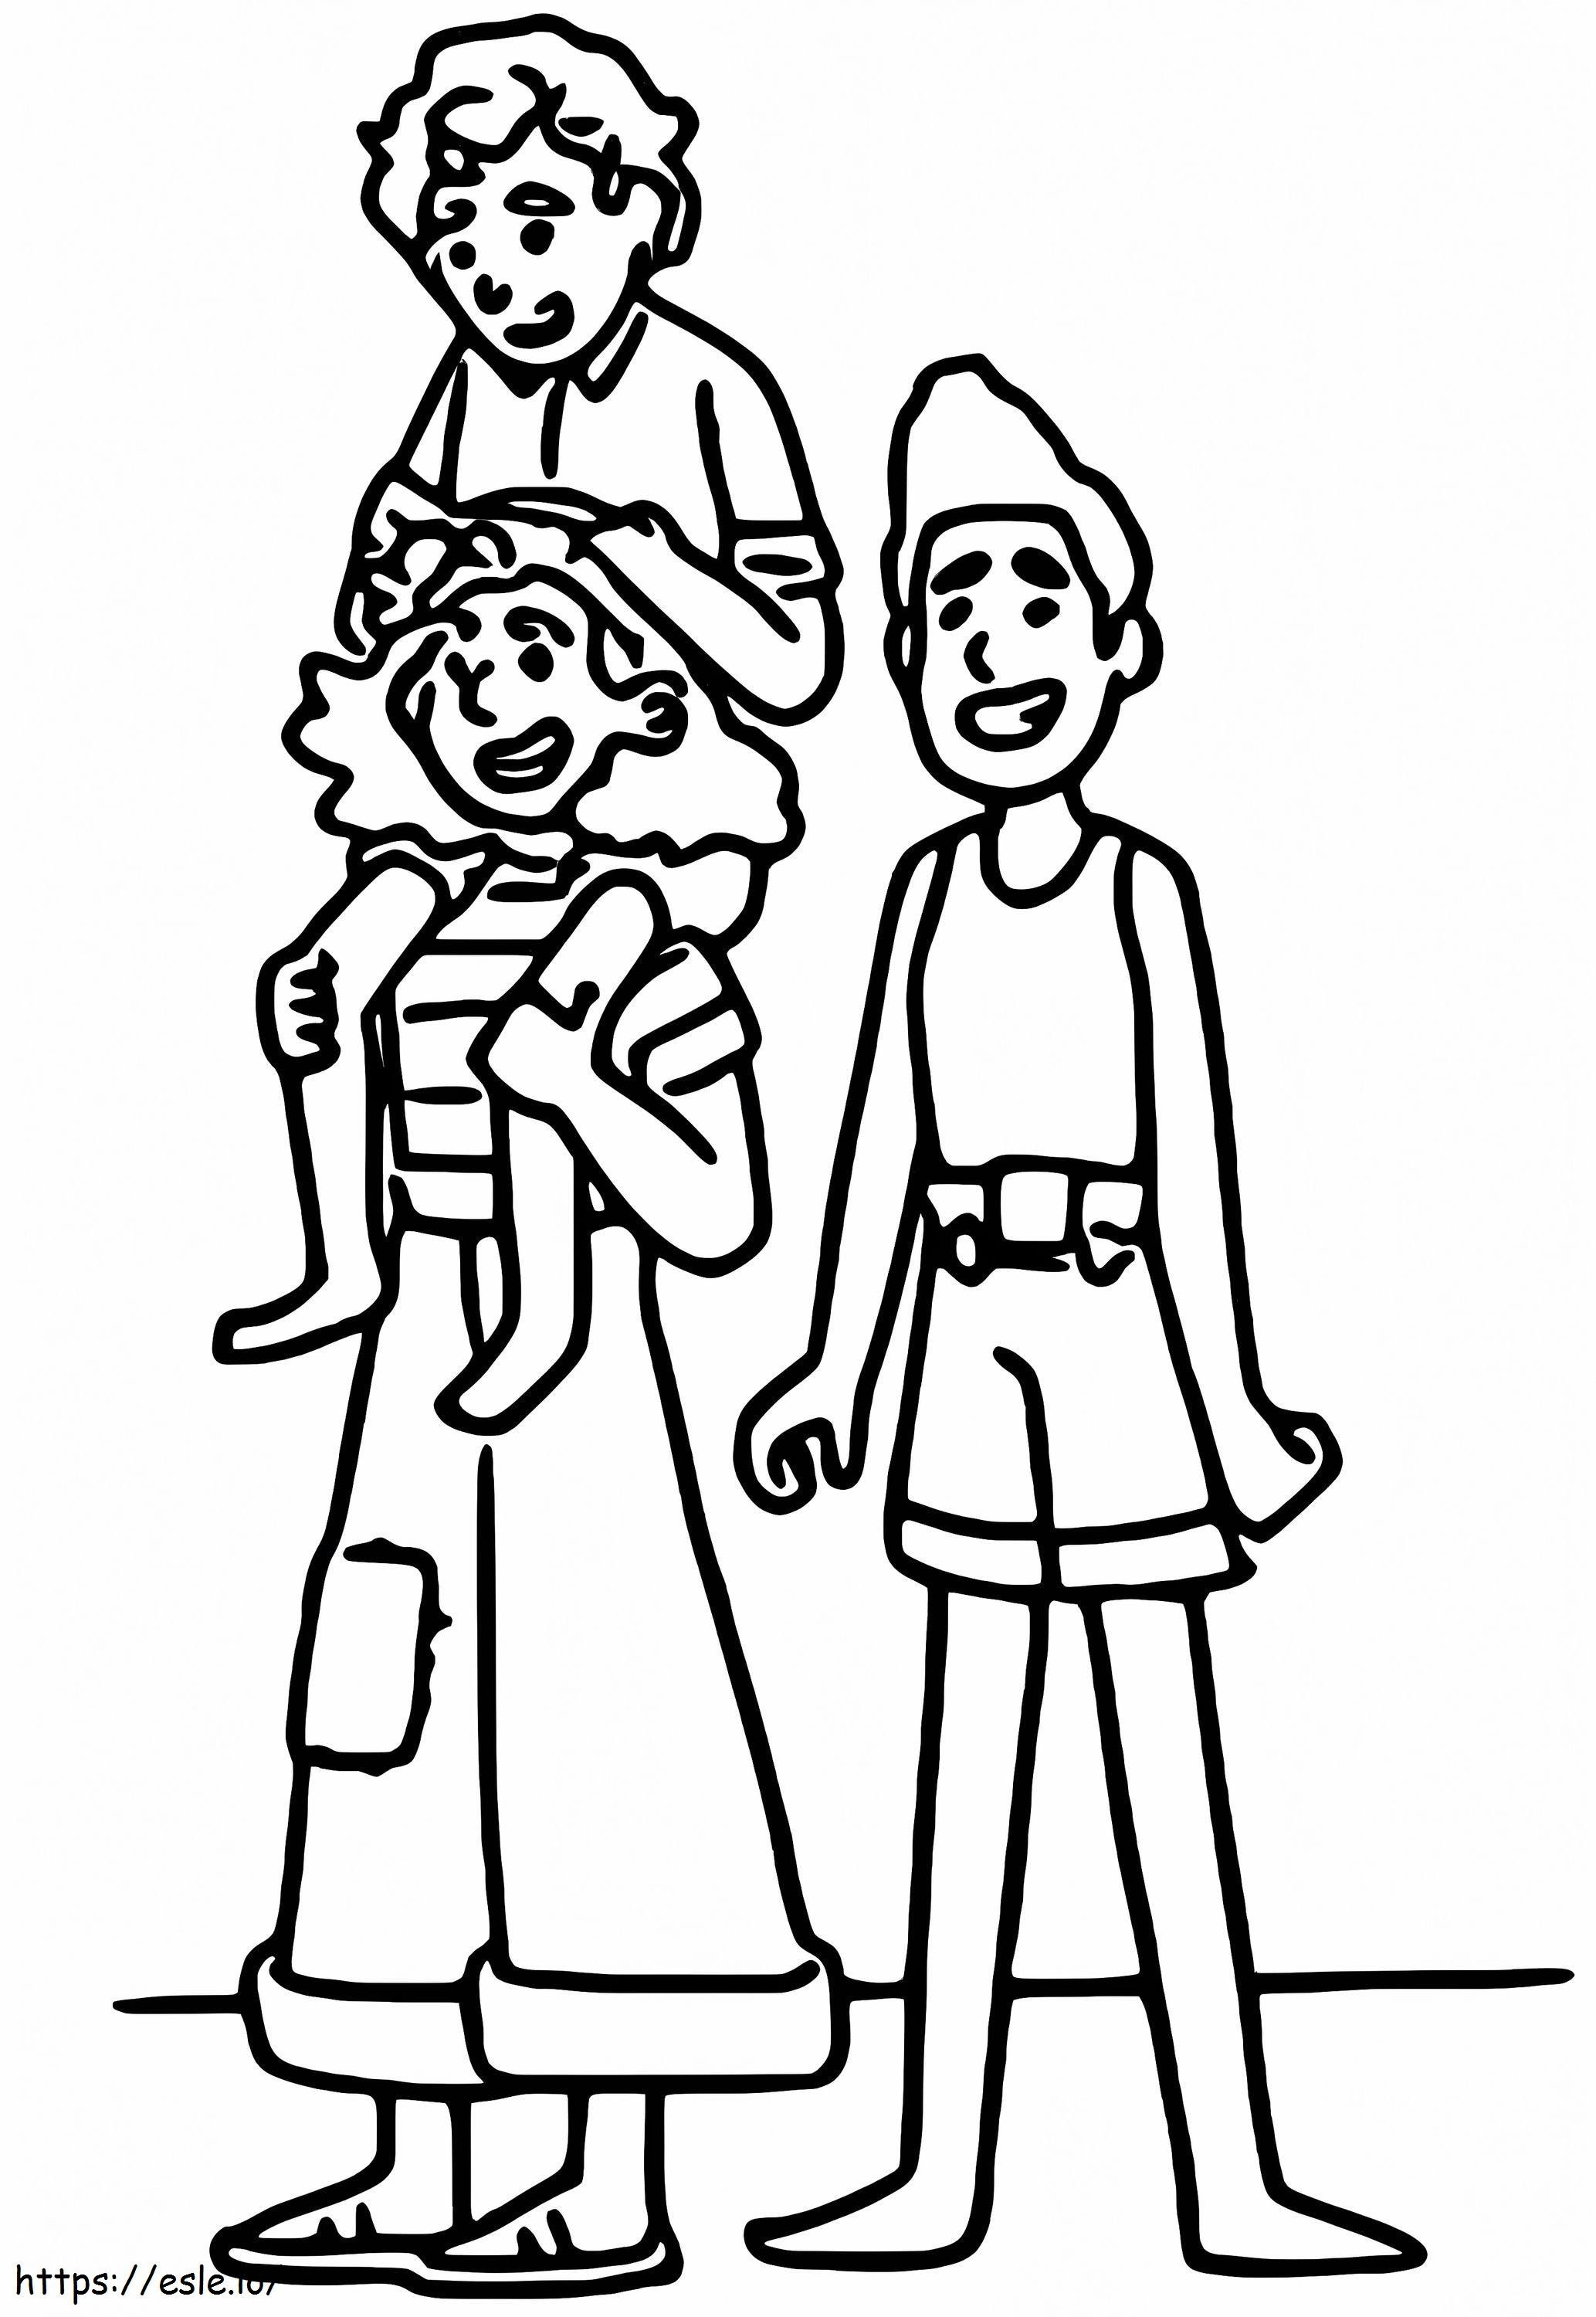 Lucas Family coloring page